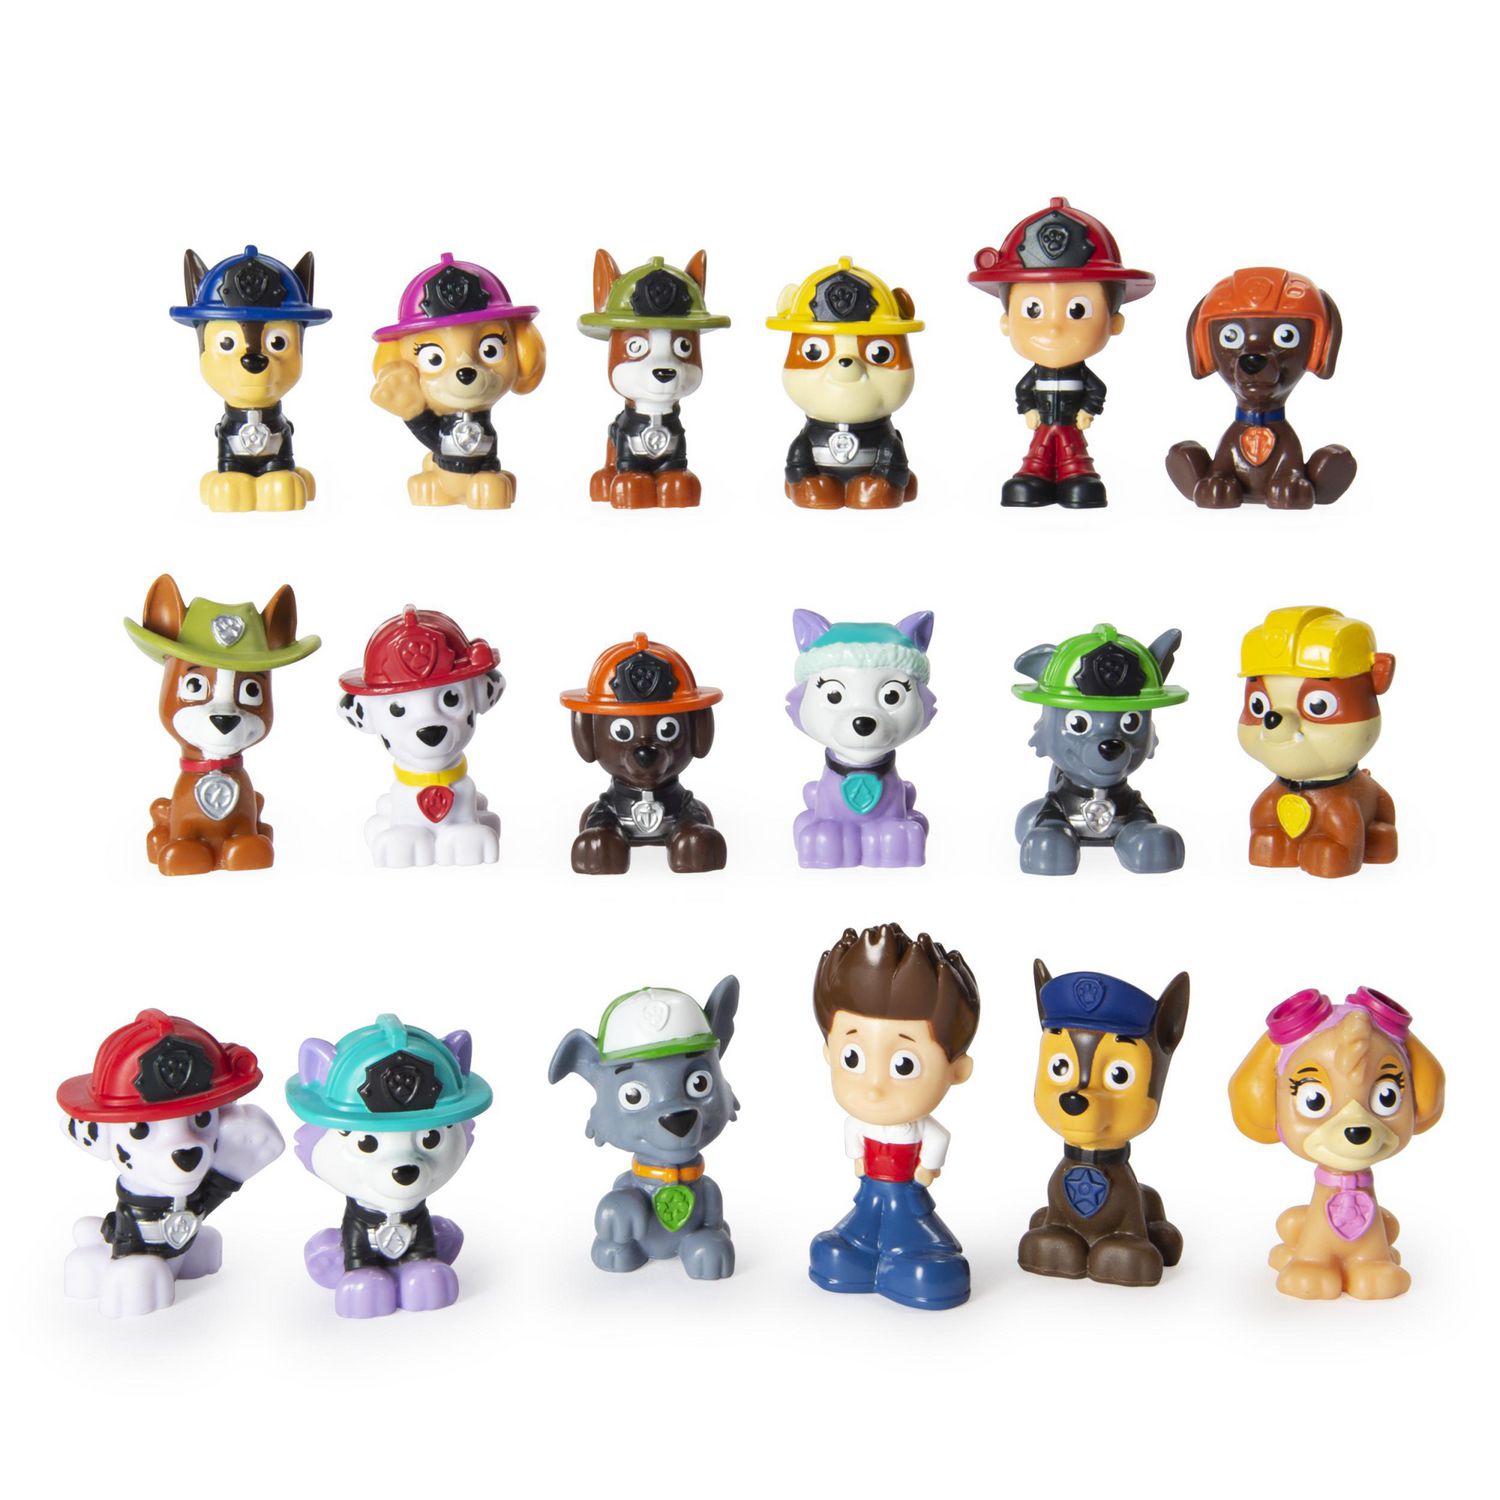 –　Patrol　Mini-Figure　Collectible　Blind　Paw　May　Box　of　Characters　(Styles　Characters　and　Vary)　Paw　Patrol